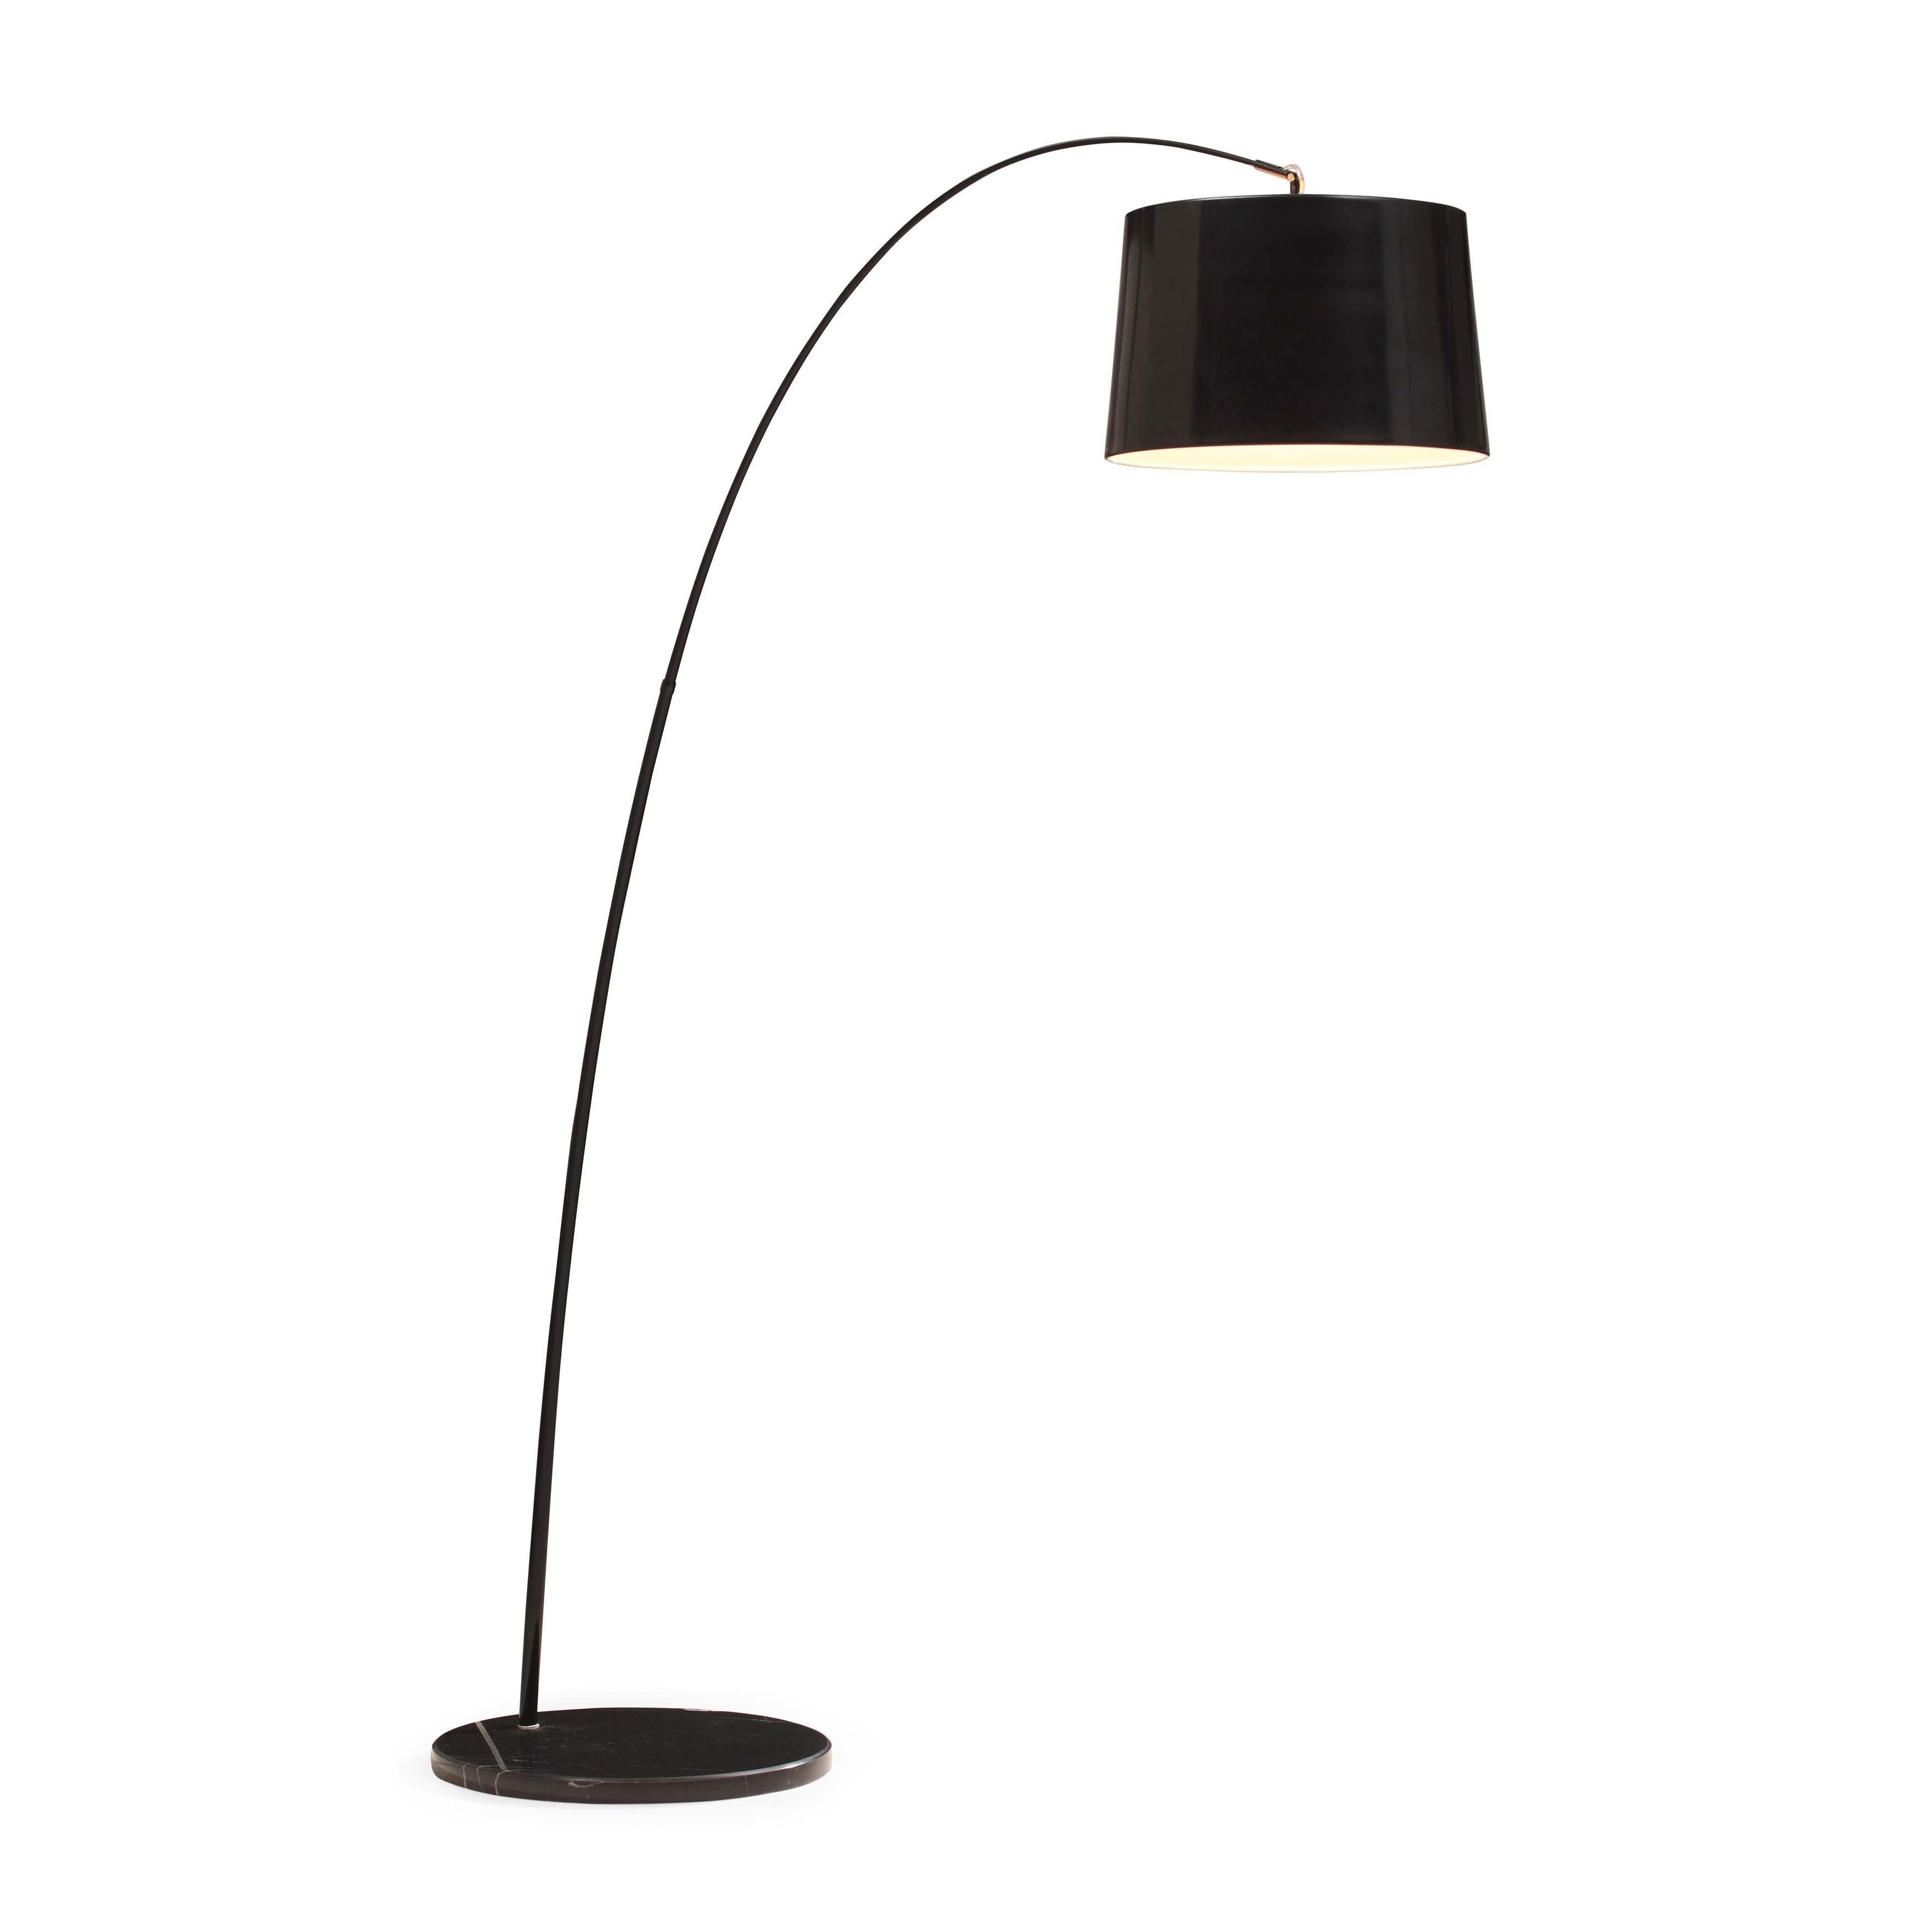 Zuo Twisty Floor Lamp Products Home Office Accessories in size 3500 X 3500